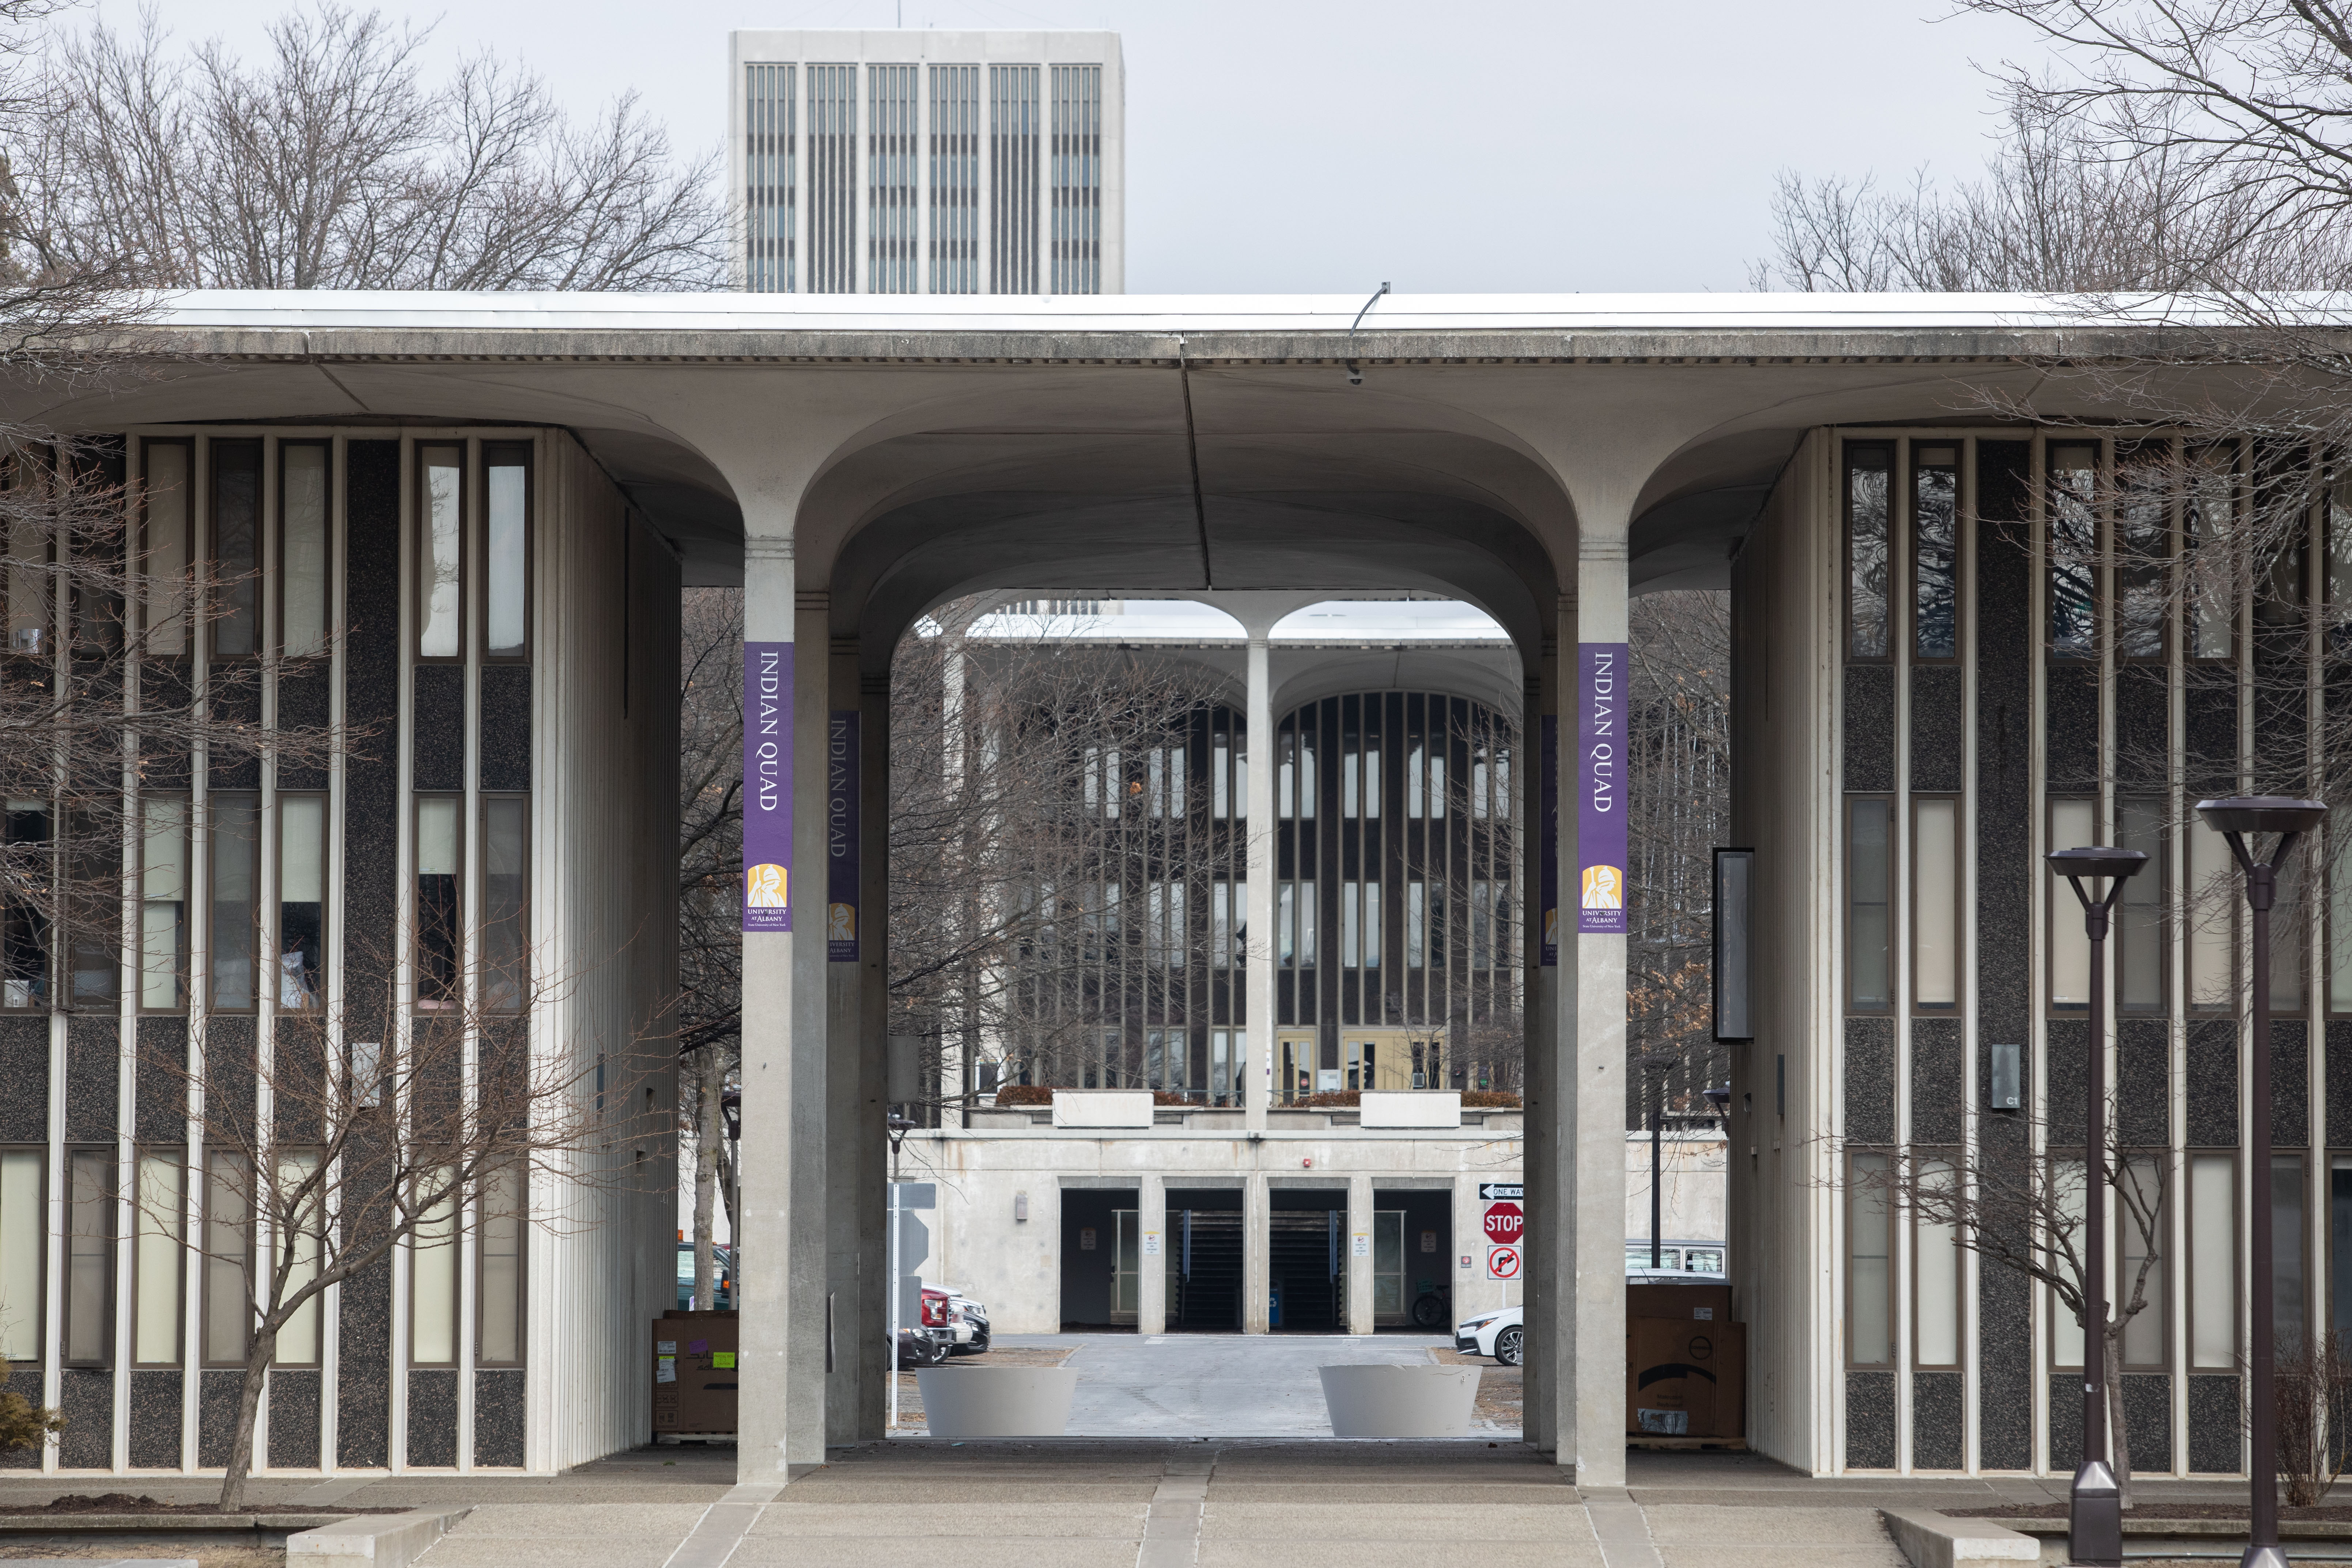 A large, concrete building with tall pillars and purple signs that say Indian Quad